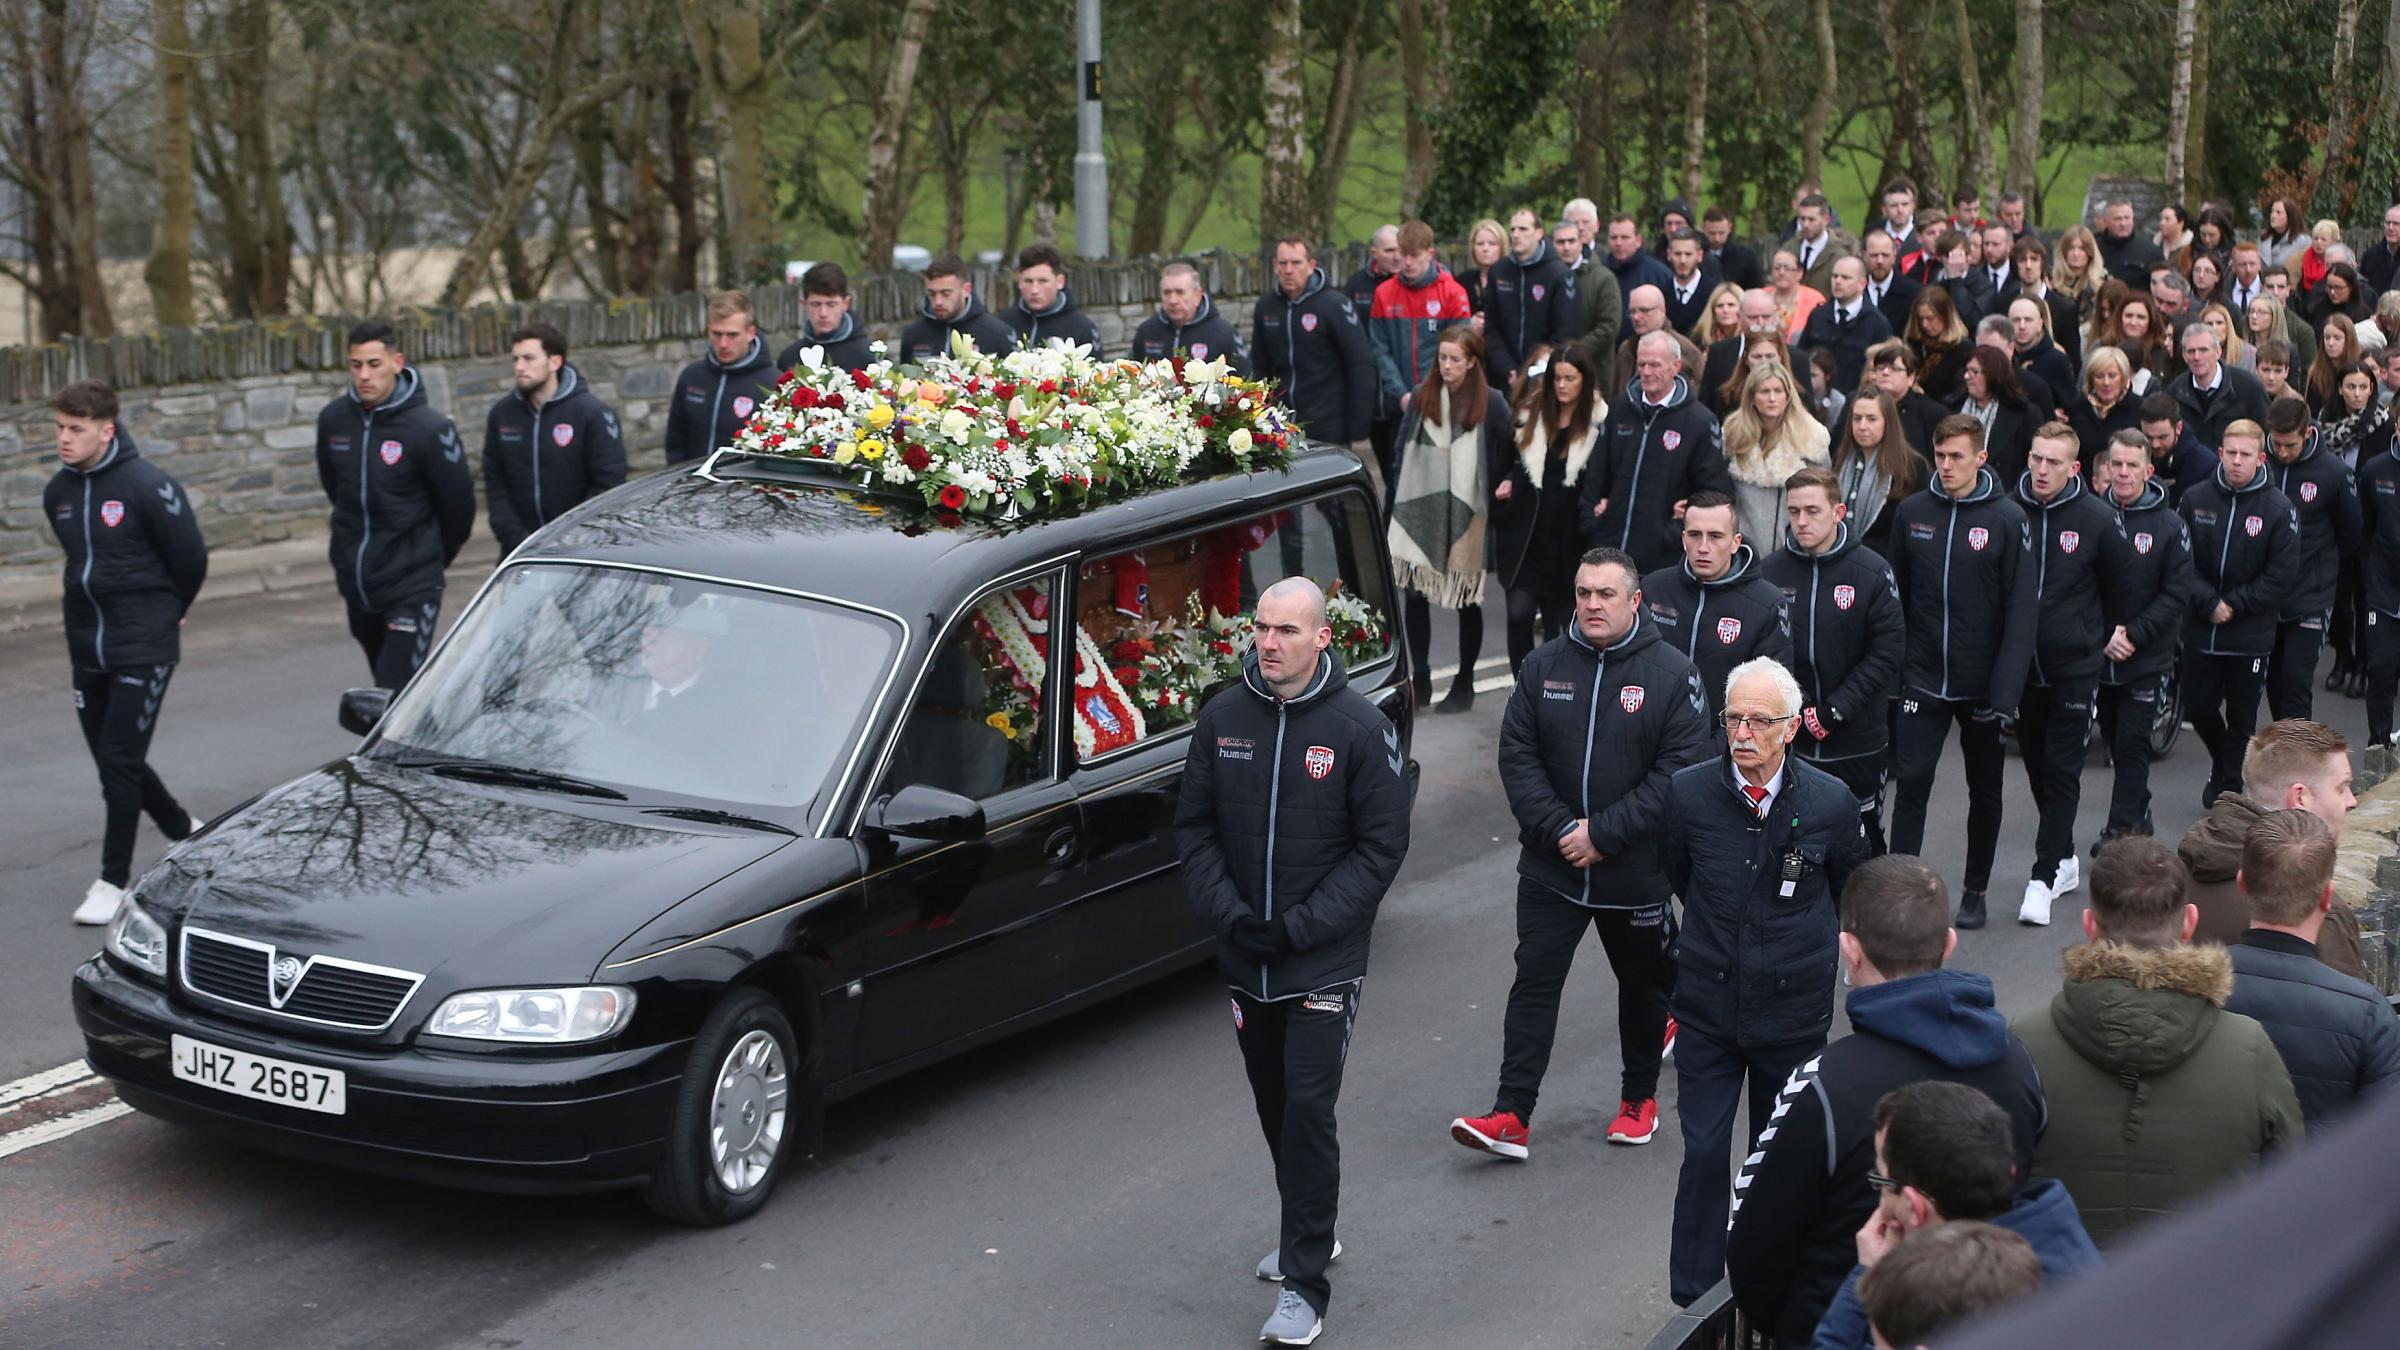 'Fearless' Derry City captain Ryan McBride remembered at funeral - Bournemouth Echo